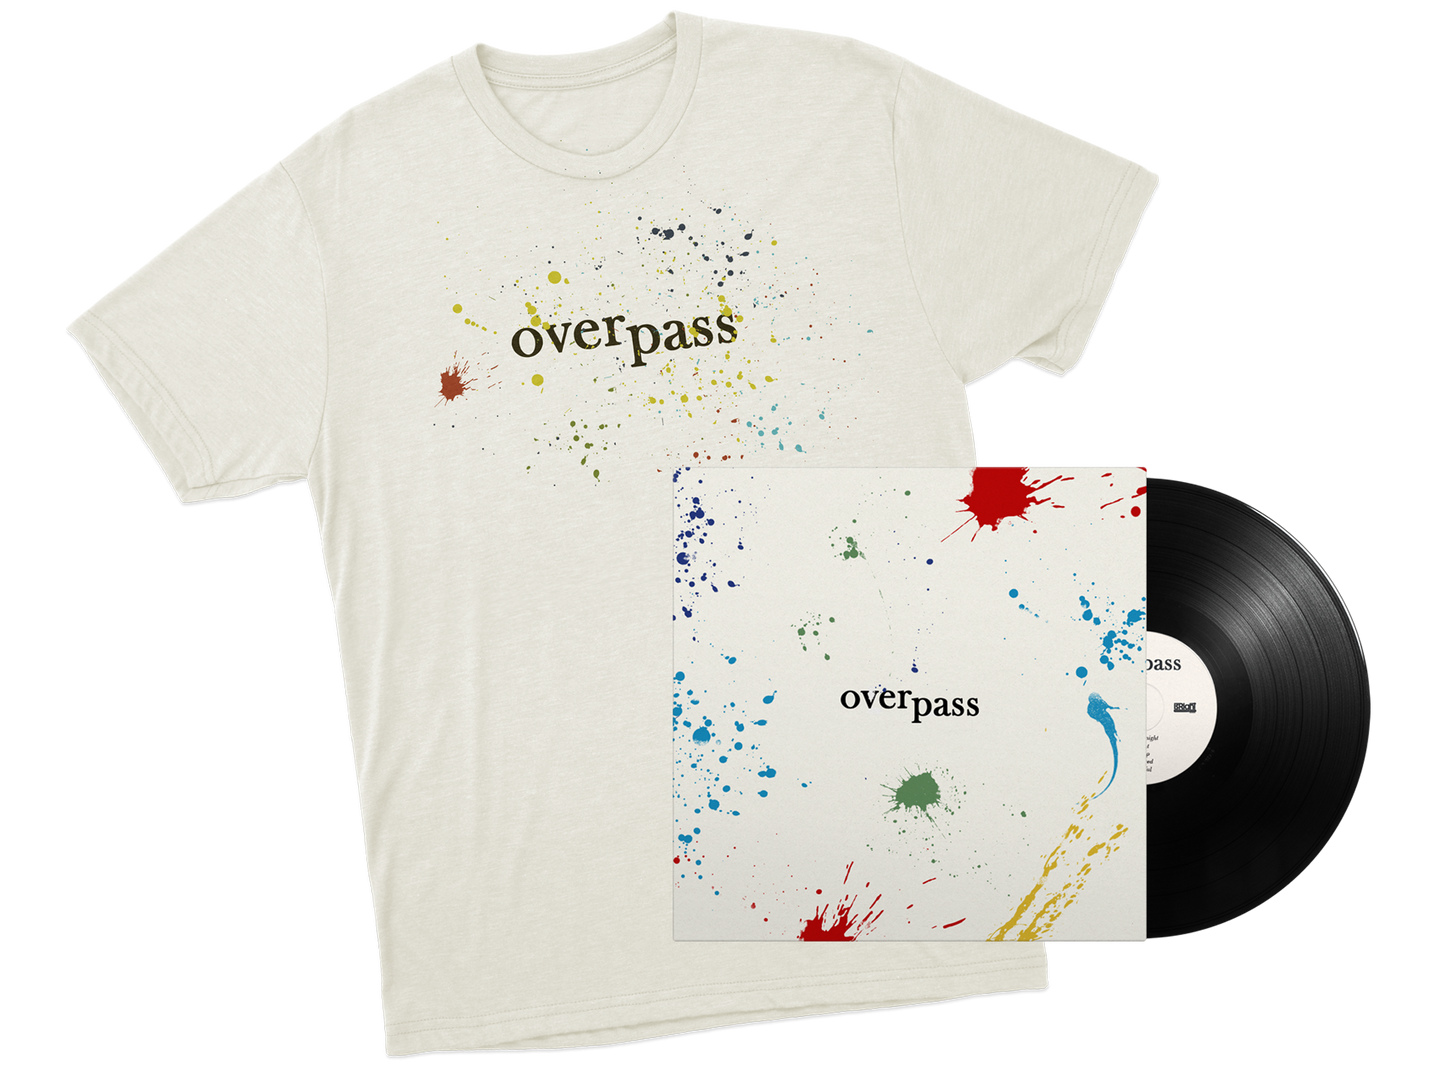 overpass - 'From the Night' Black Vinyl (Hand Painted Sleeve) + Tee